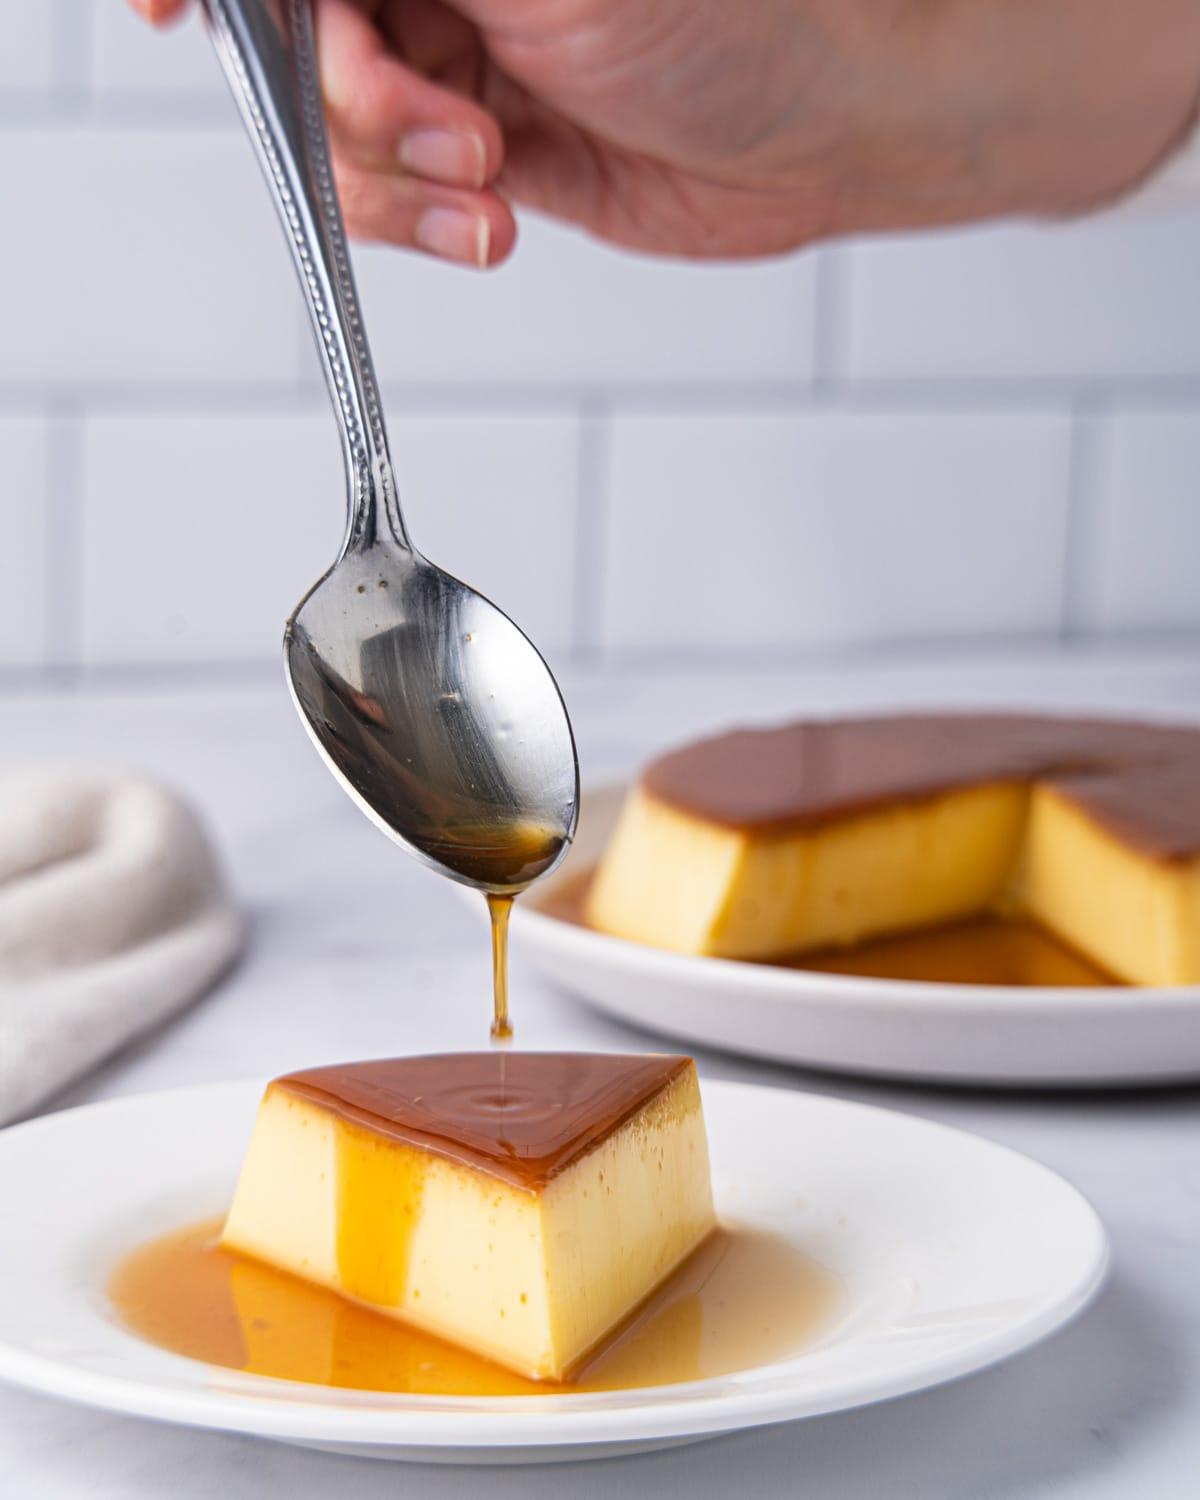 Slice of flan on a plate with spoon drizzling caramel on top.